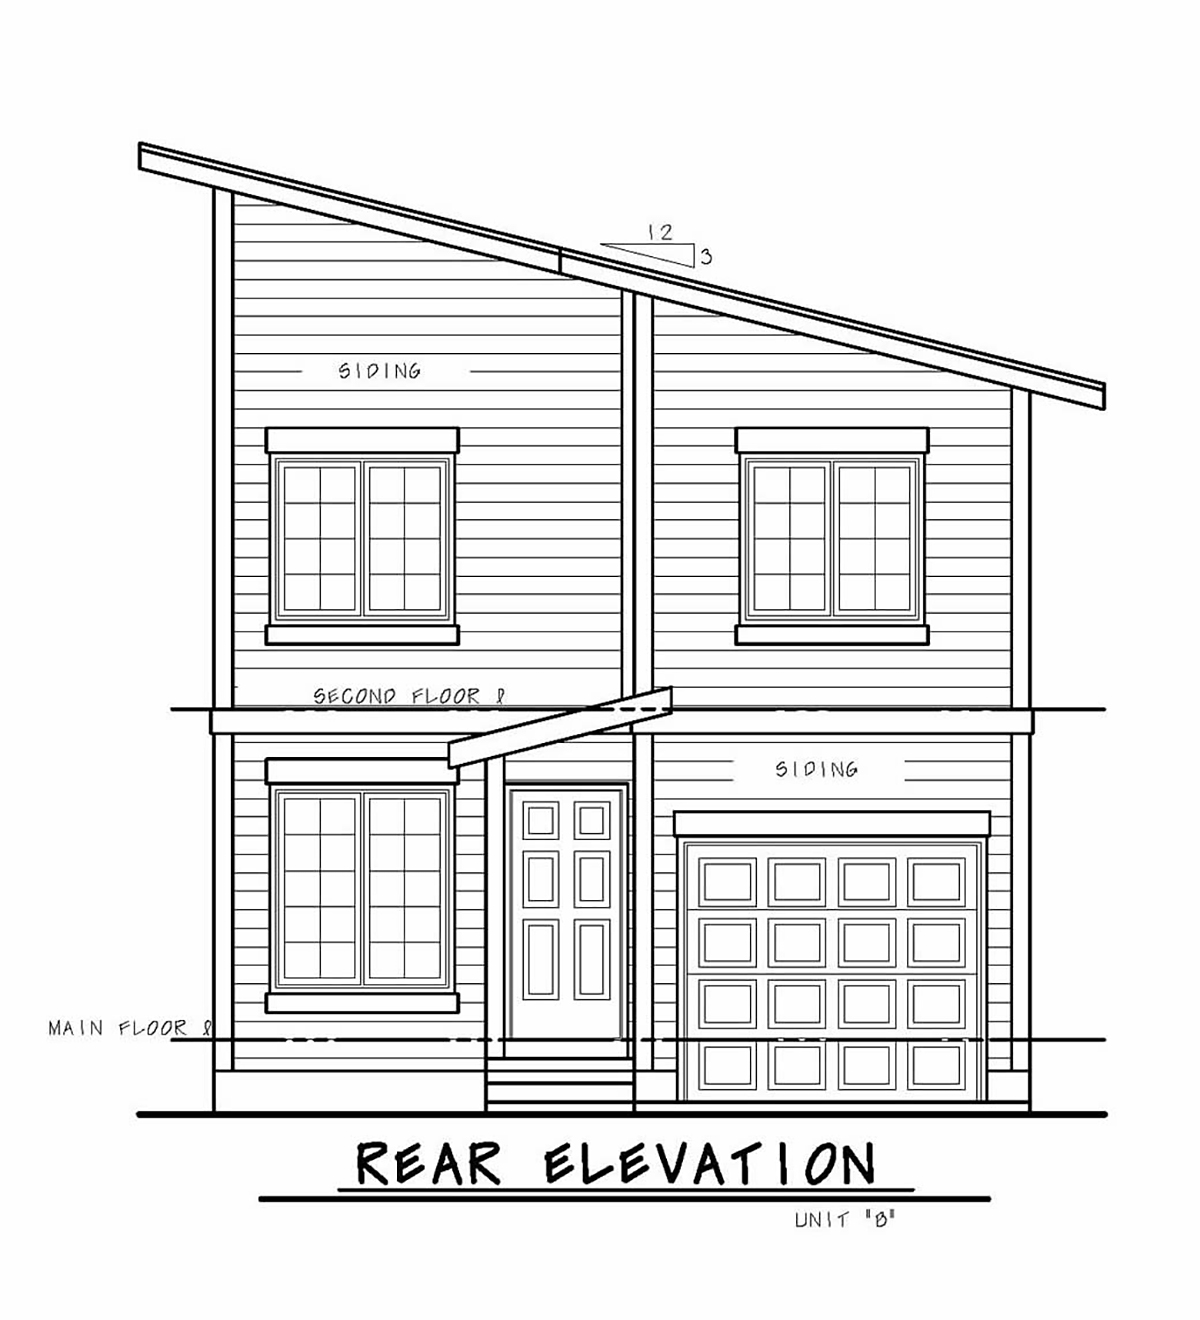 Contemporary Multi-Family Plan 75732 with 3 Beds, 3 Baths, 1 Car Garage Rear Elevation